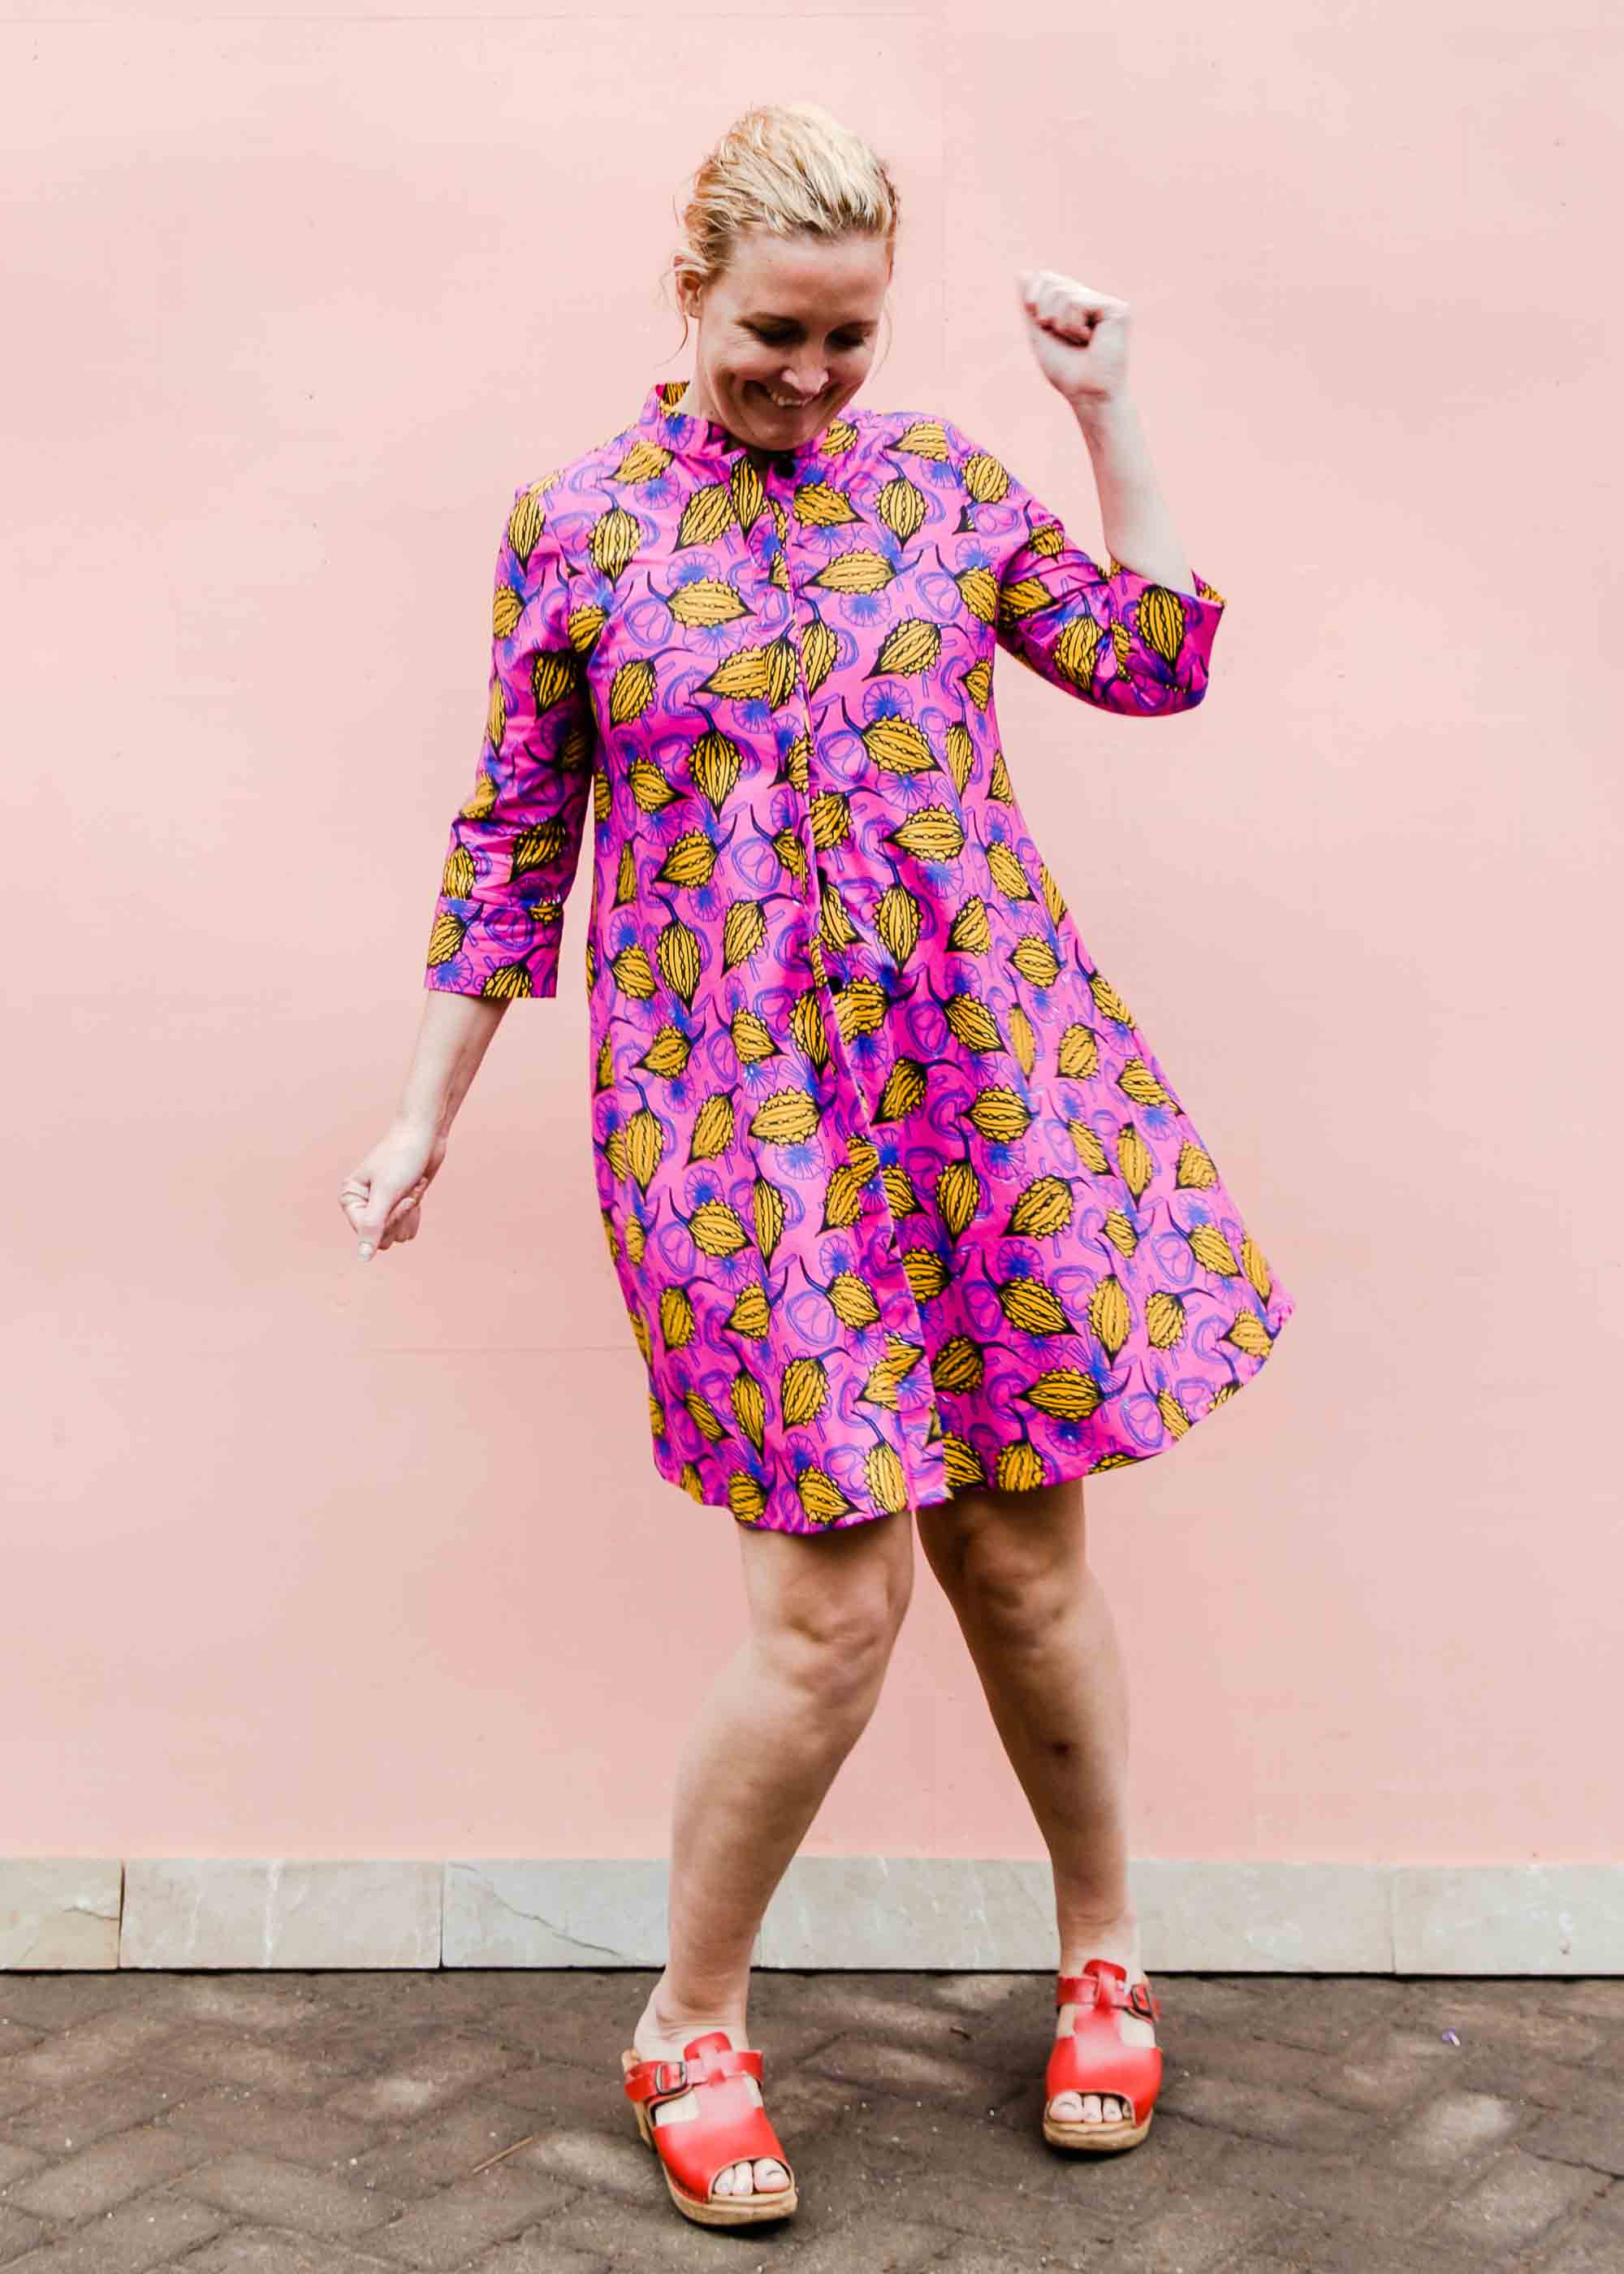 Model wearing pink dress with yellow seed design.